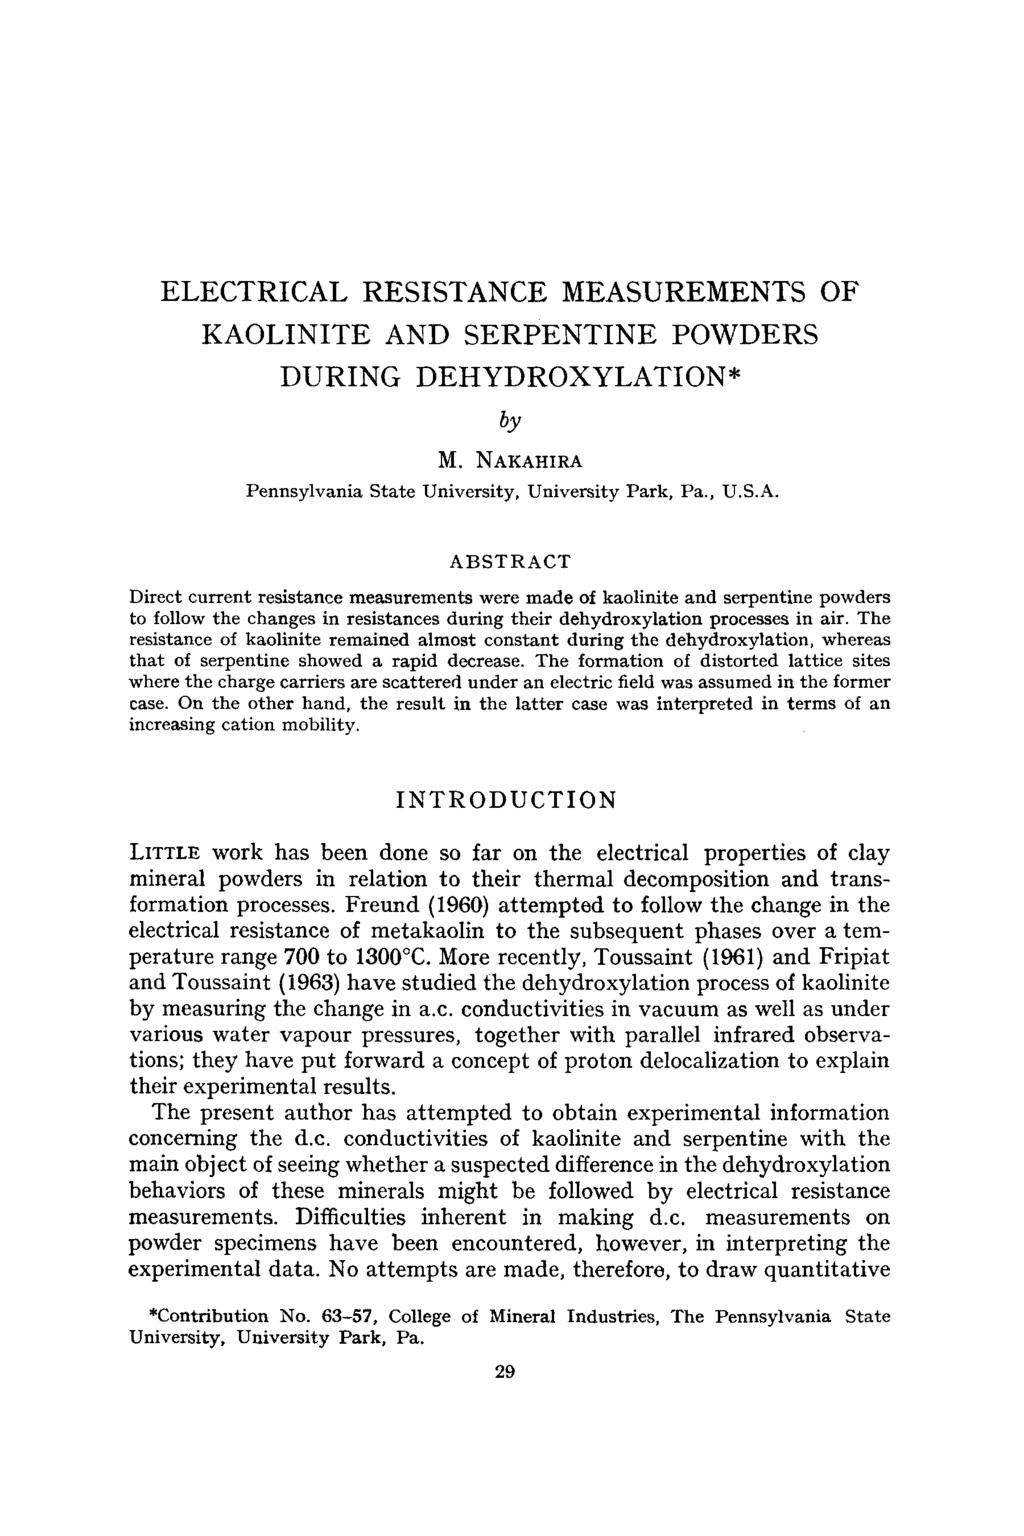 ELECTRICAL RESISTANCE MEASUREMENTS OF KAOLINITE AND SERPENTINE POWDERS DURING DEHYDROXYLATION* by M. NAKAHIRA Pennsylvania State University, University Park, Pa., U.S.A. ABSTRACT Direct current resistance measurements were made of kaolinite and serpentine powders to follow the changes in resistances during their dehydroxylation processes in air.